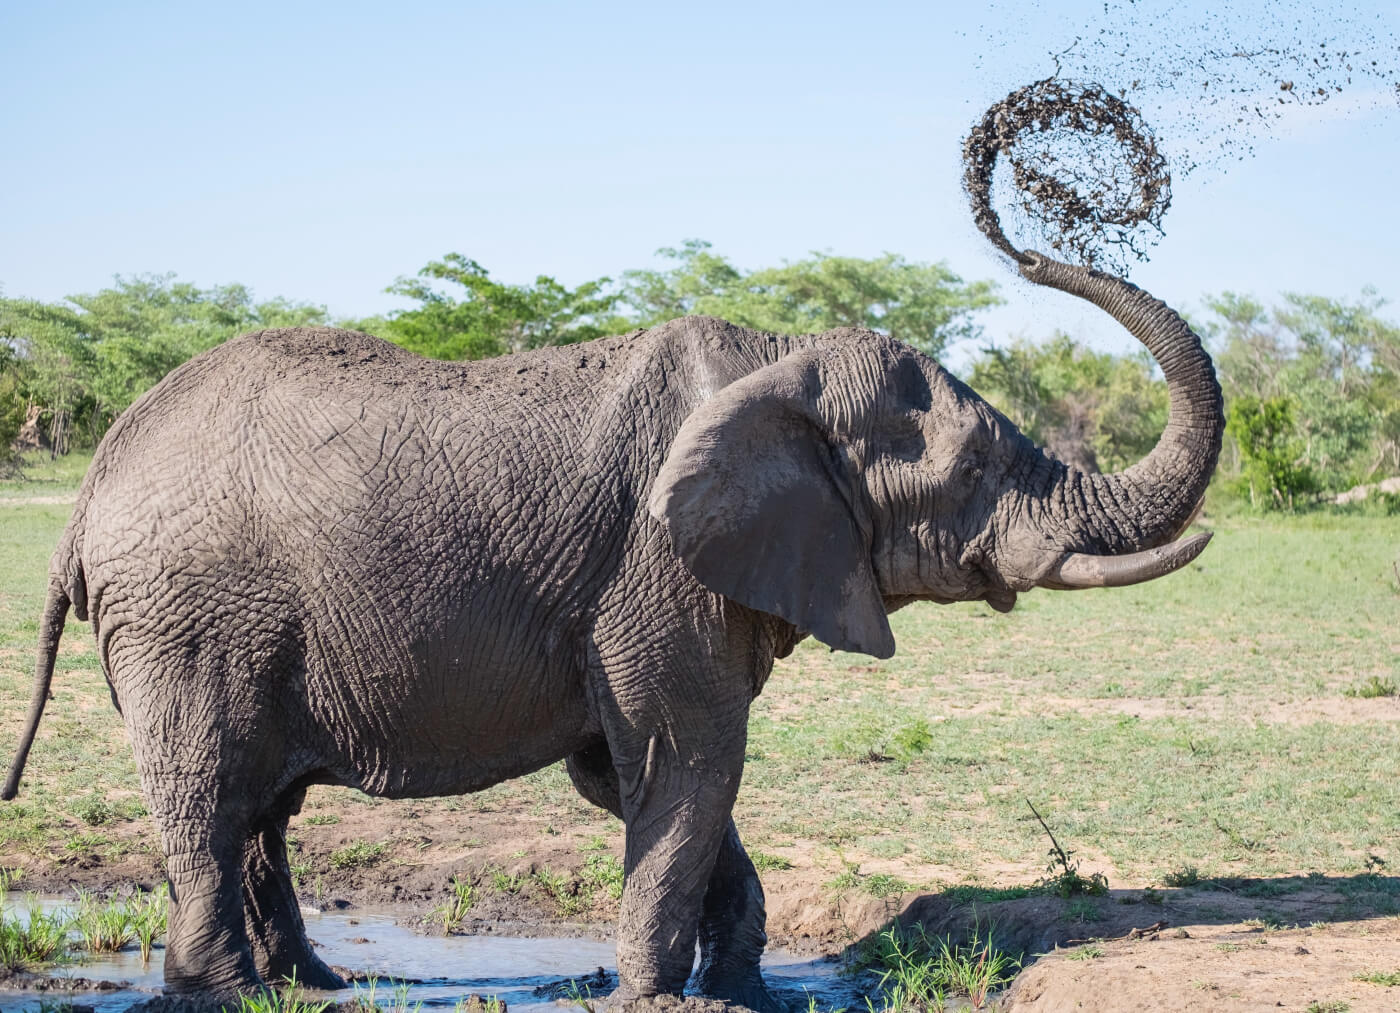 VICTORY! Sunraysia Pulls Support of Cruel Elephant Polo